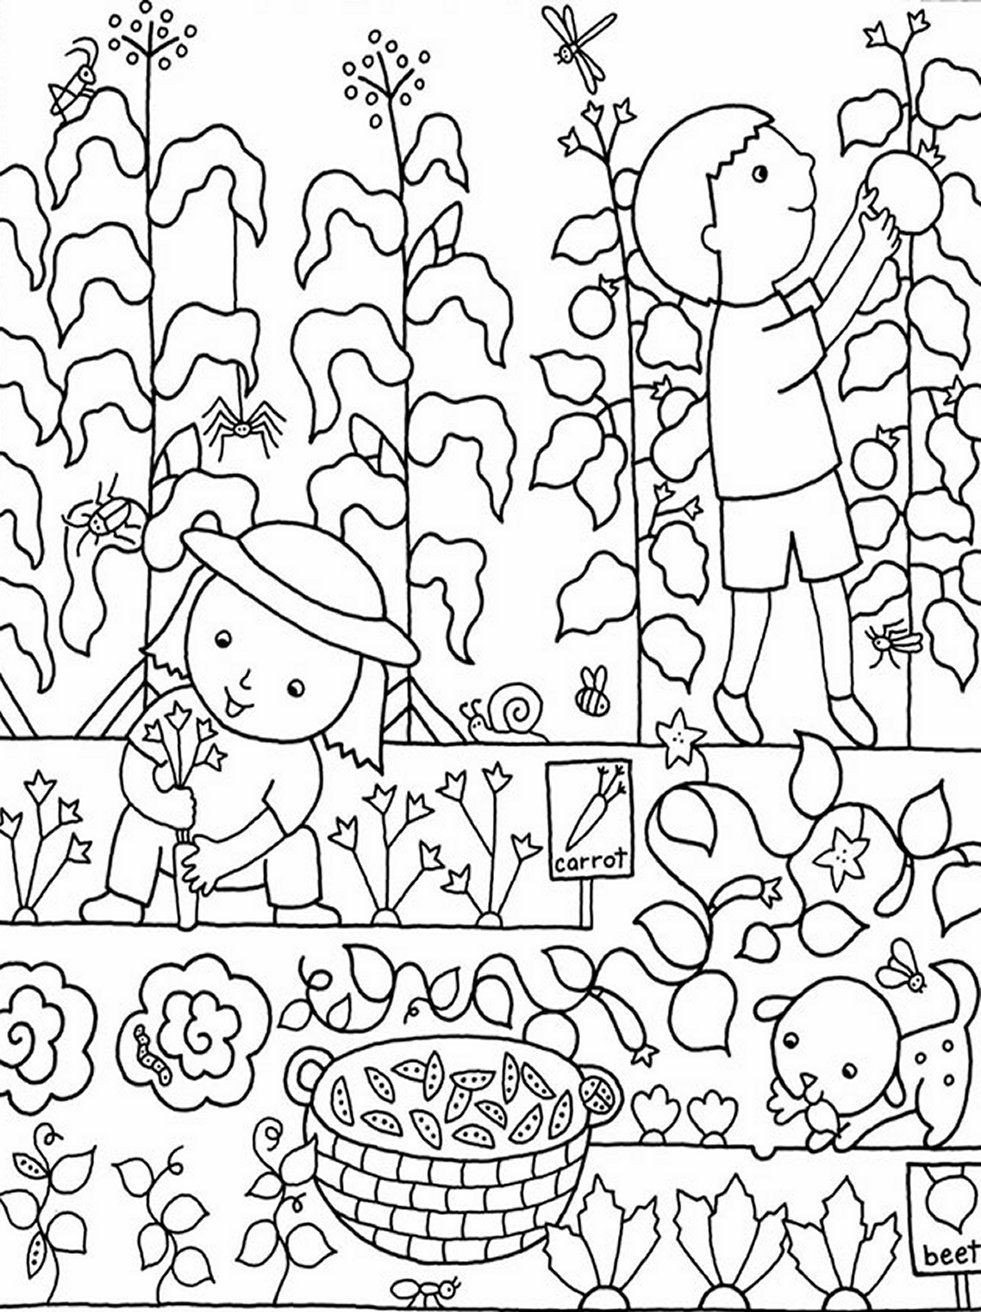 Coloring Pages Garden
 Pin by Carrie Ridley on Crafts